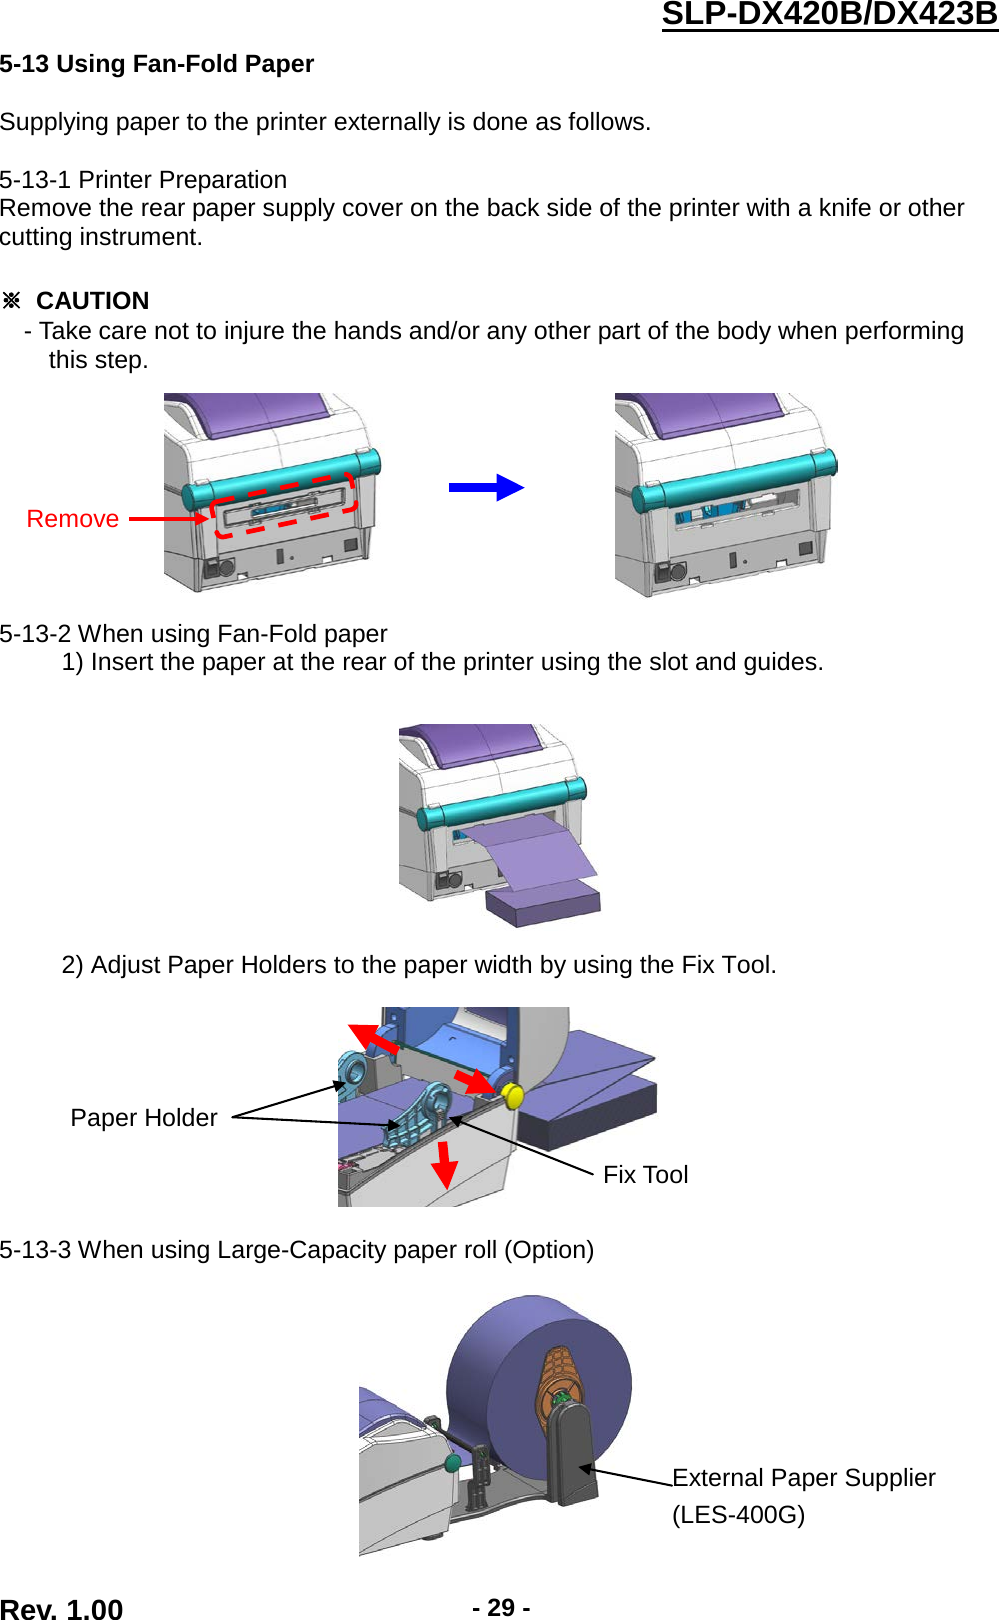  Rev. 1.00 - 29 - SLP-DX420B/DX423B  5-13 Using Fan-Fold Paper  Supplying paper to the printer externally is done as follows.  5-13-1 Printer Preparation Remove the rear paper supply cover on the back side of the printer with a knife or other cutting instrument.  ※ CAUTION - Take care not to injure the hands and/or any other part of the body when performing   this step.                              5-13-2 When using Fan-Fold paper      1) Insert the paper at the rear of the printer using the slot and guides.          2) Adjust Paper Holders to the paper width by using the Fix Tool.      5-13-3 When using Large-Capacity paper roll (Option)   Remove Fix Tool  Paper Holder  External Paper Supplier (LES-400G) 